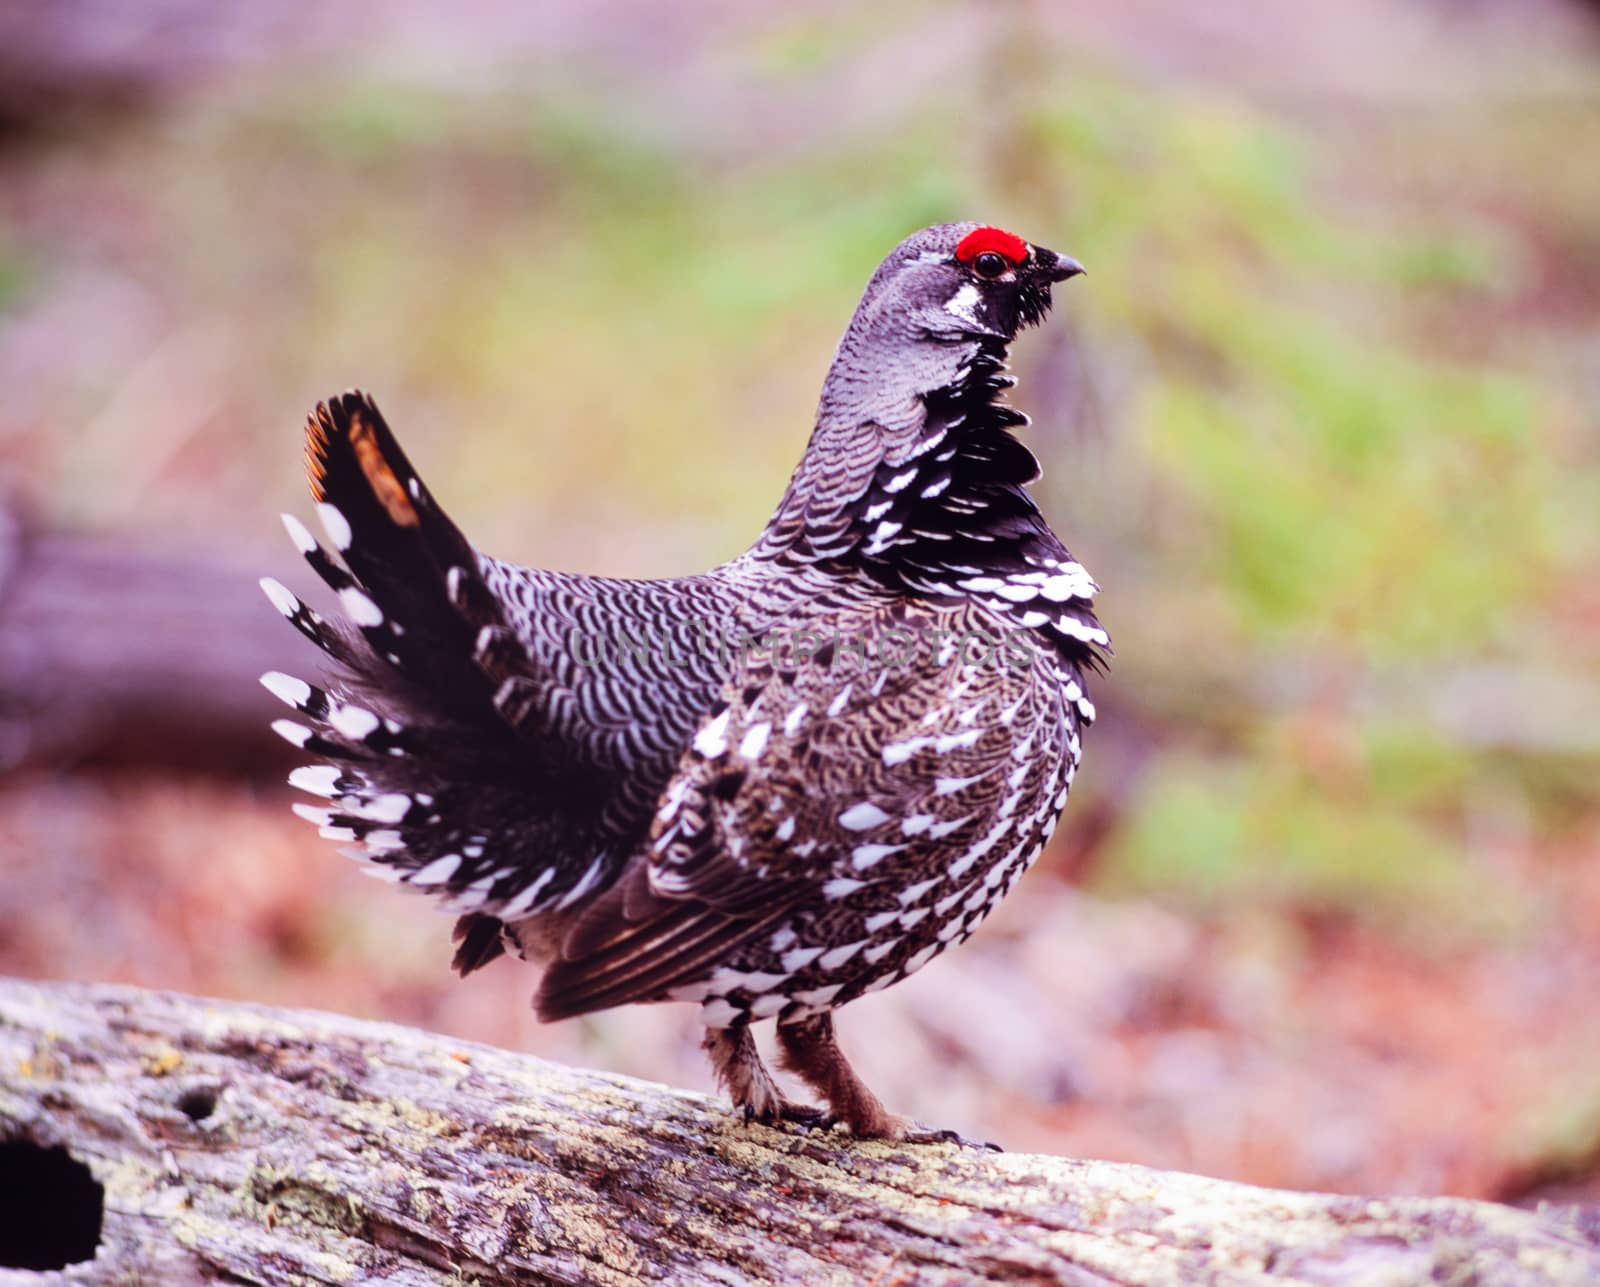 Male bird Spruce Grouse, Dendragapus canadensis, posing during mating season in the wild